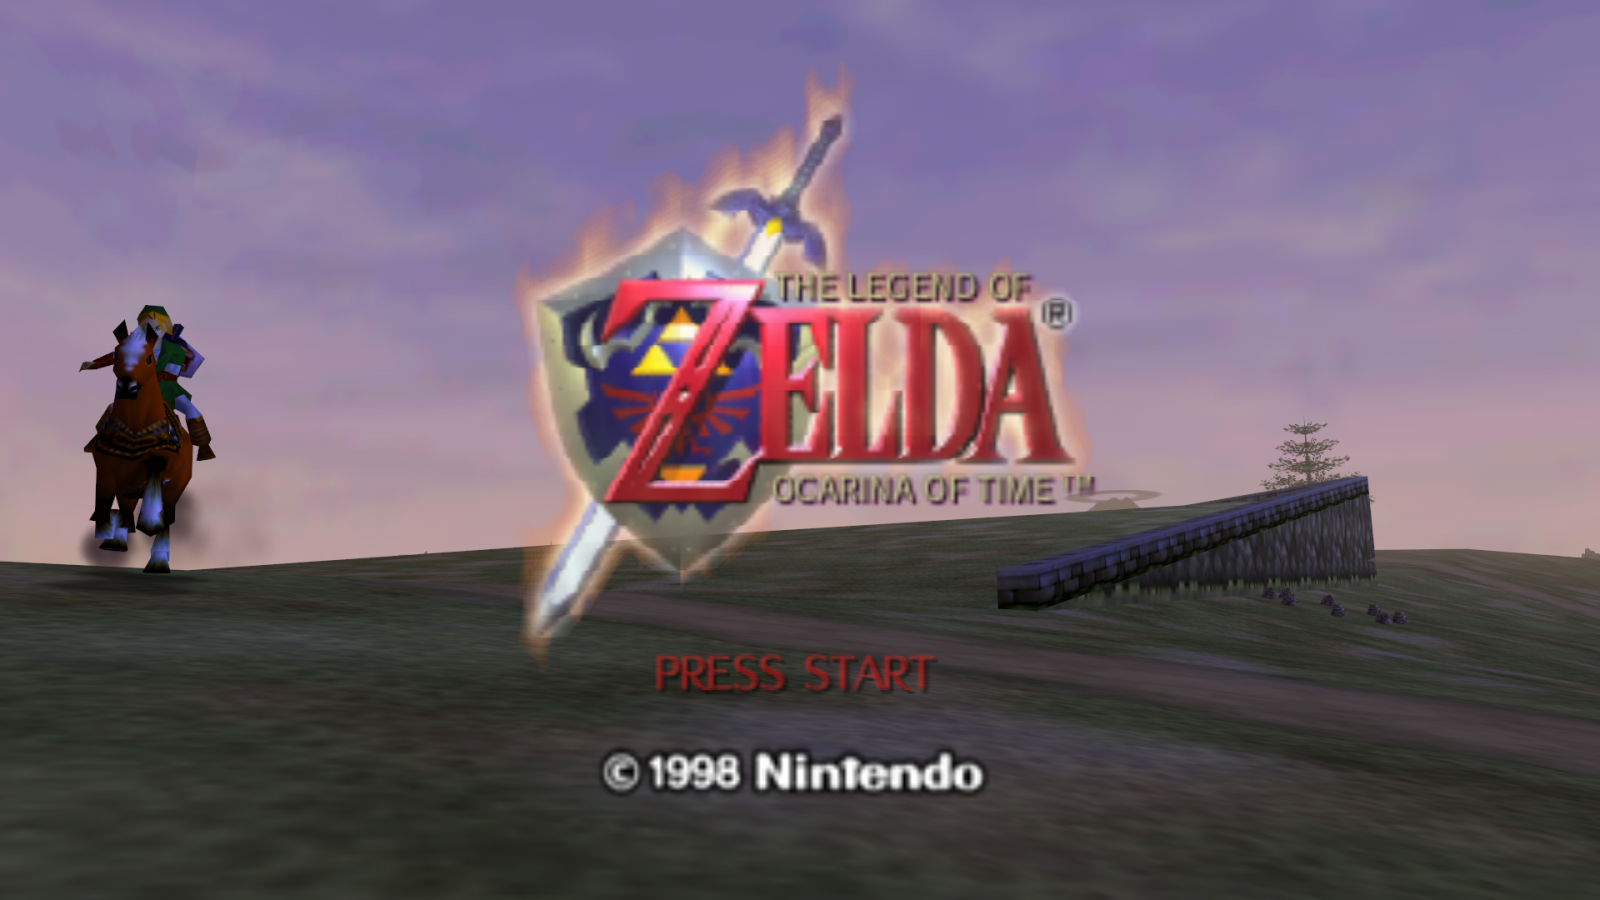 Ocarina of Time and More Coming to Nintendo Switch Online